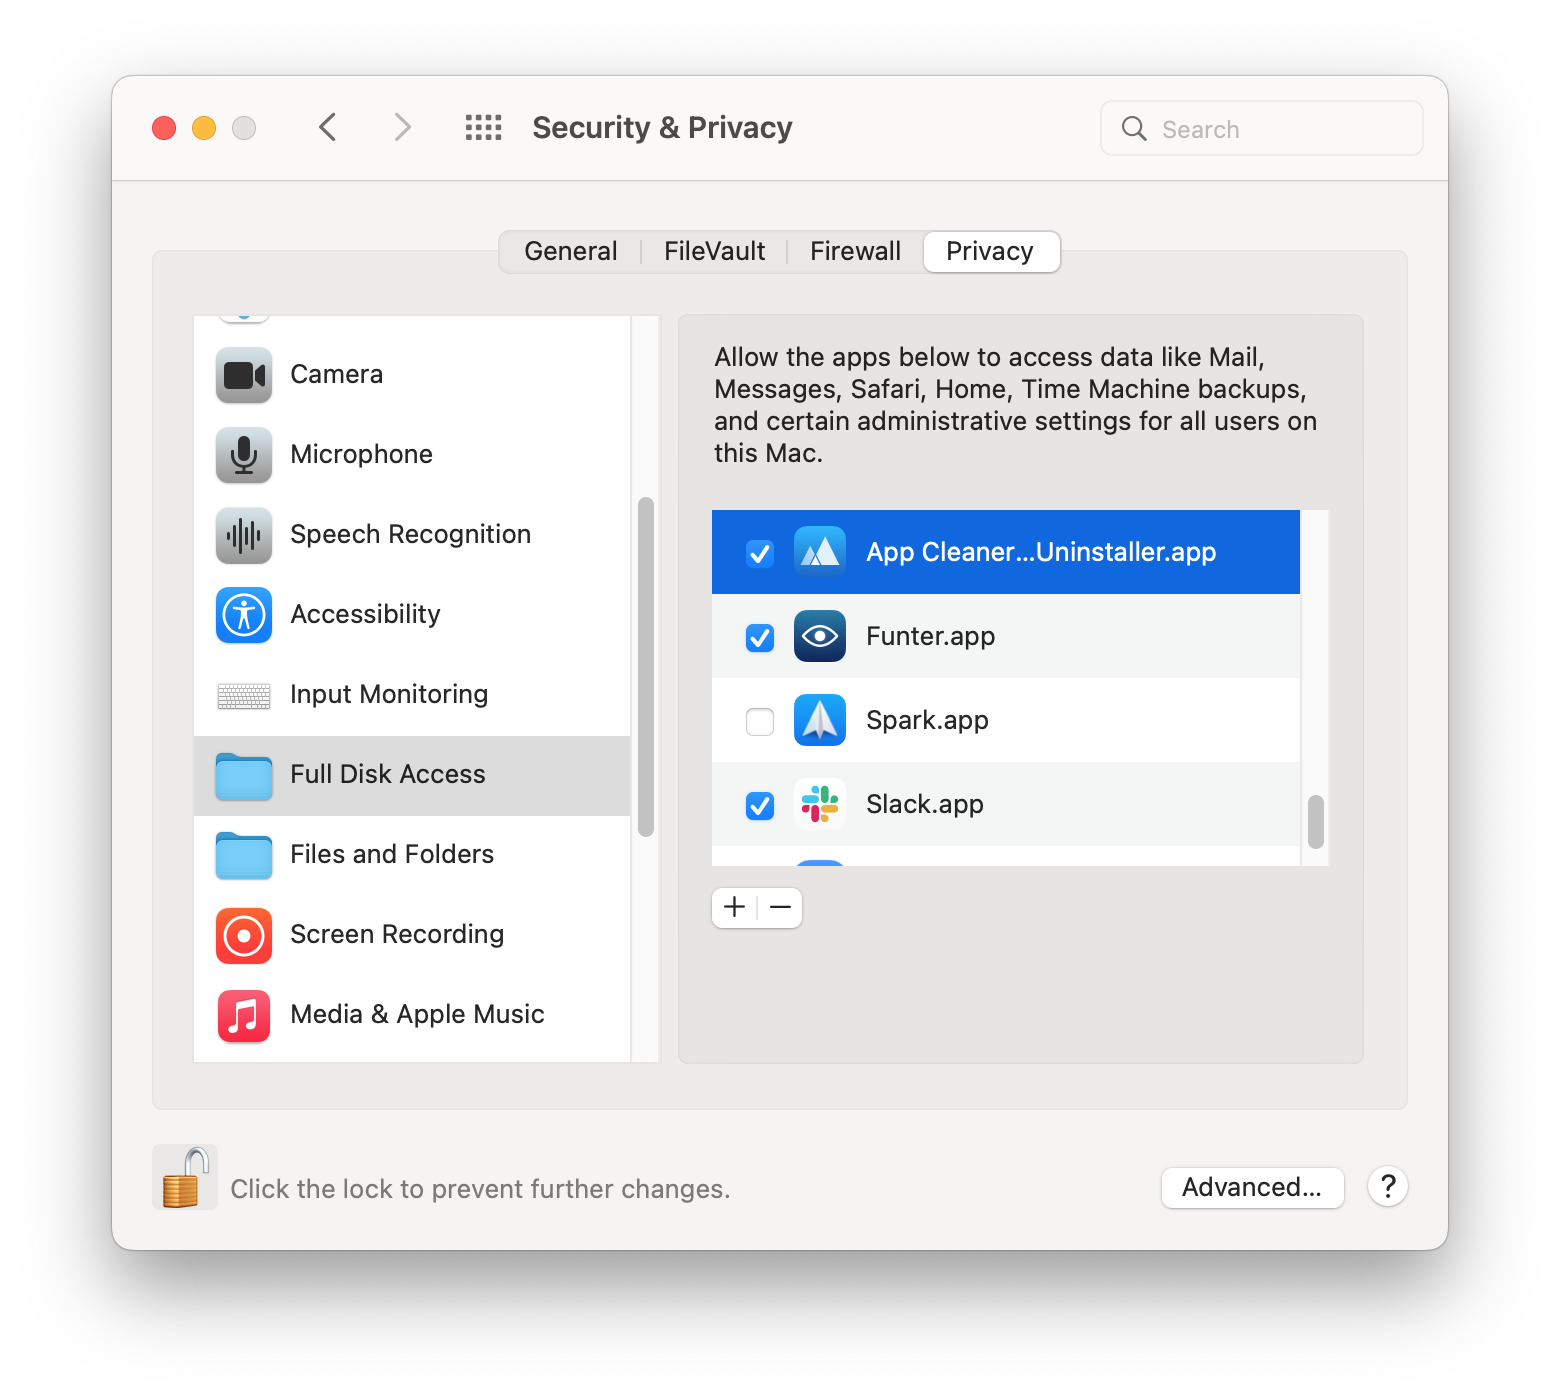 Preferences window-security and privacy section